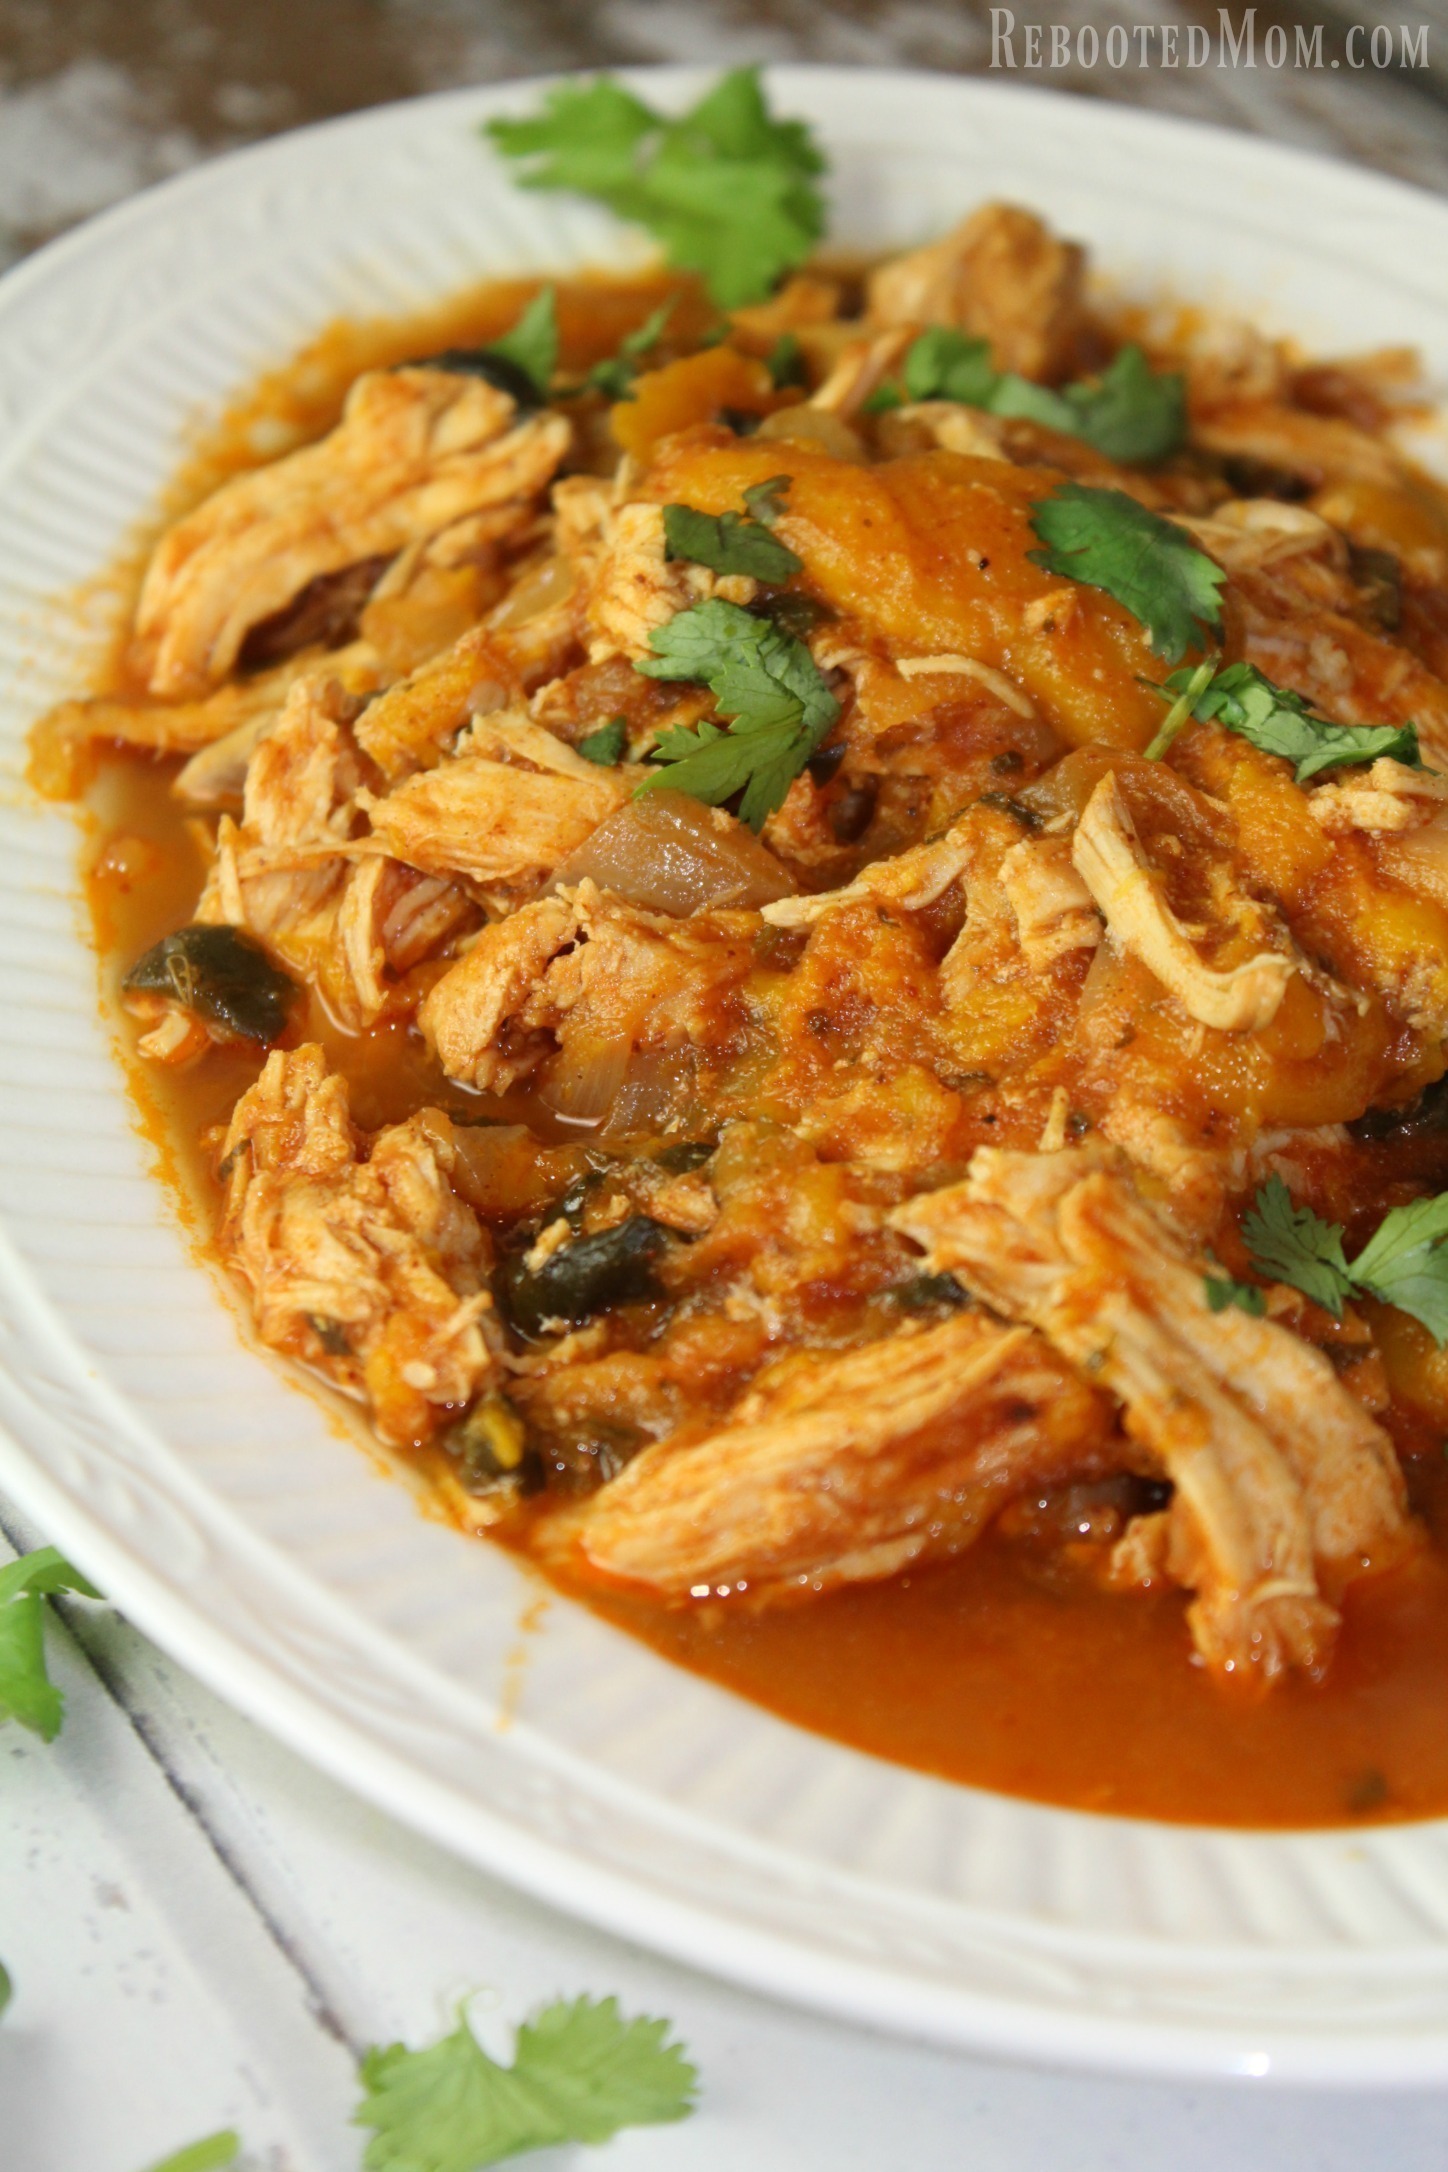 We've put together over 15 of our favorite Instant Pot chicken recipes that are easy, healthy and PERFECT for busy families! #InstantPot #PressureCooker #Chicken #ChickenRecipes #easychicken #healthychicken